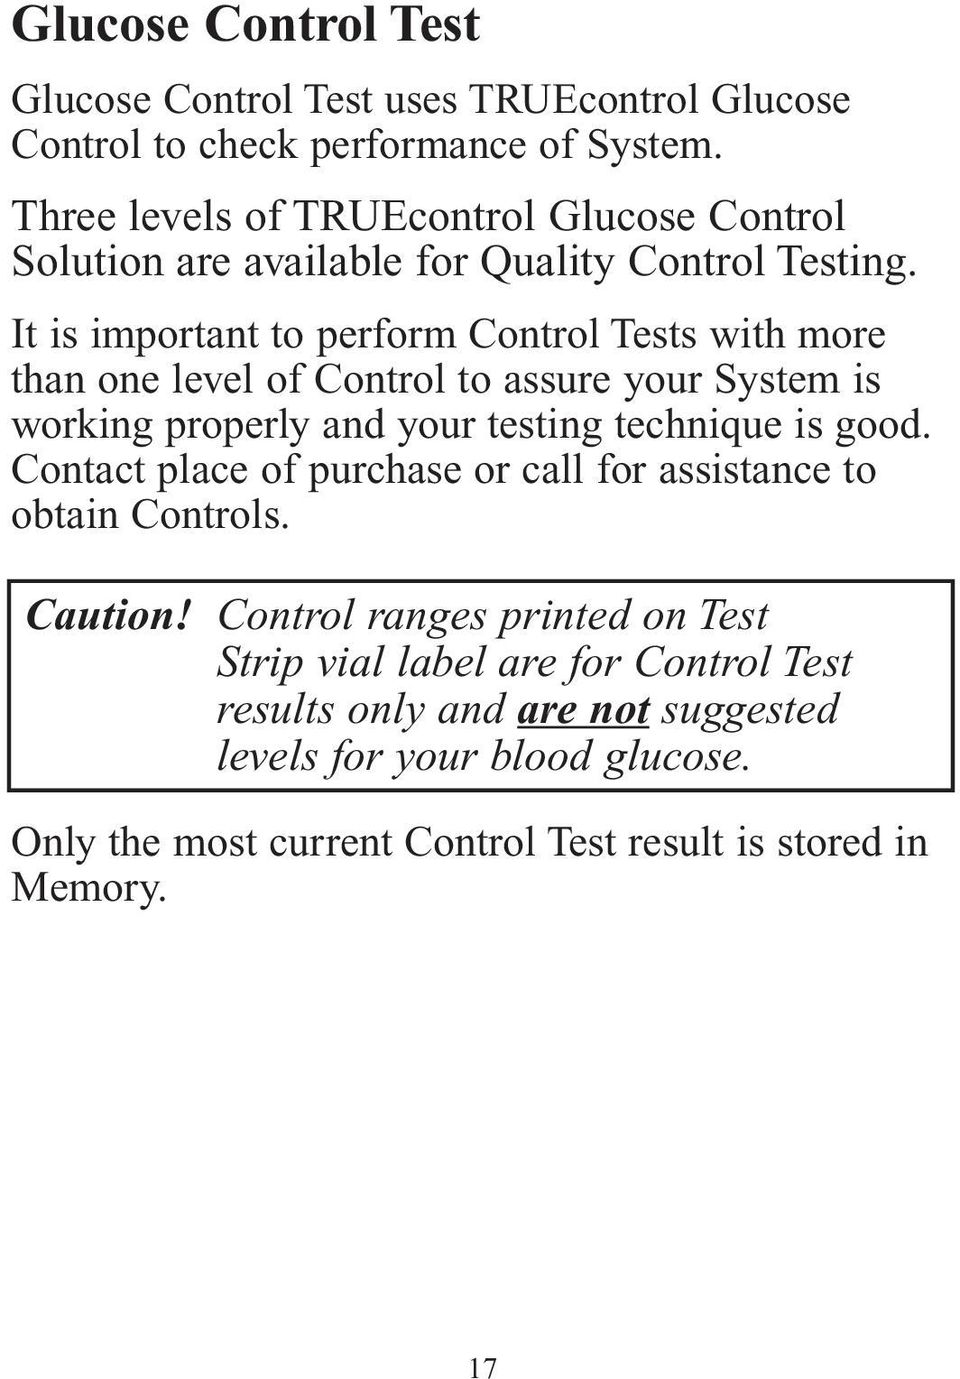 It is important to perform Control Tests with more than one level of Control to assure your System is working properly and your testing technique is good.